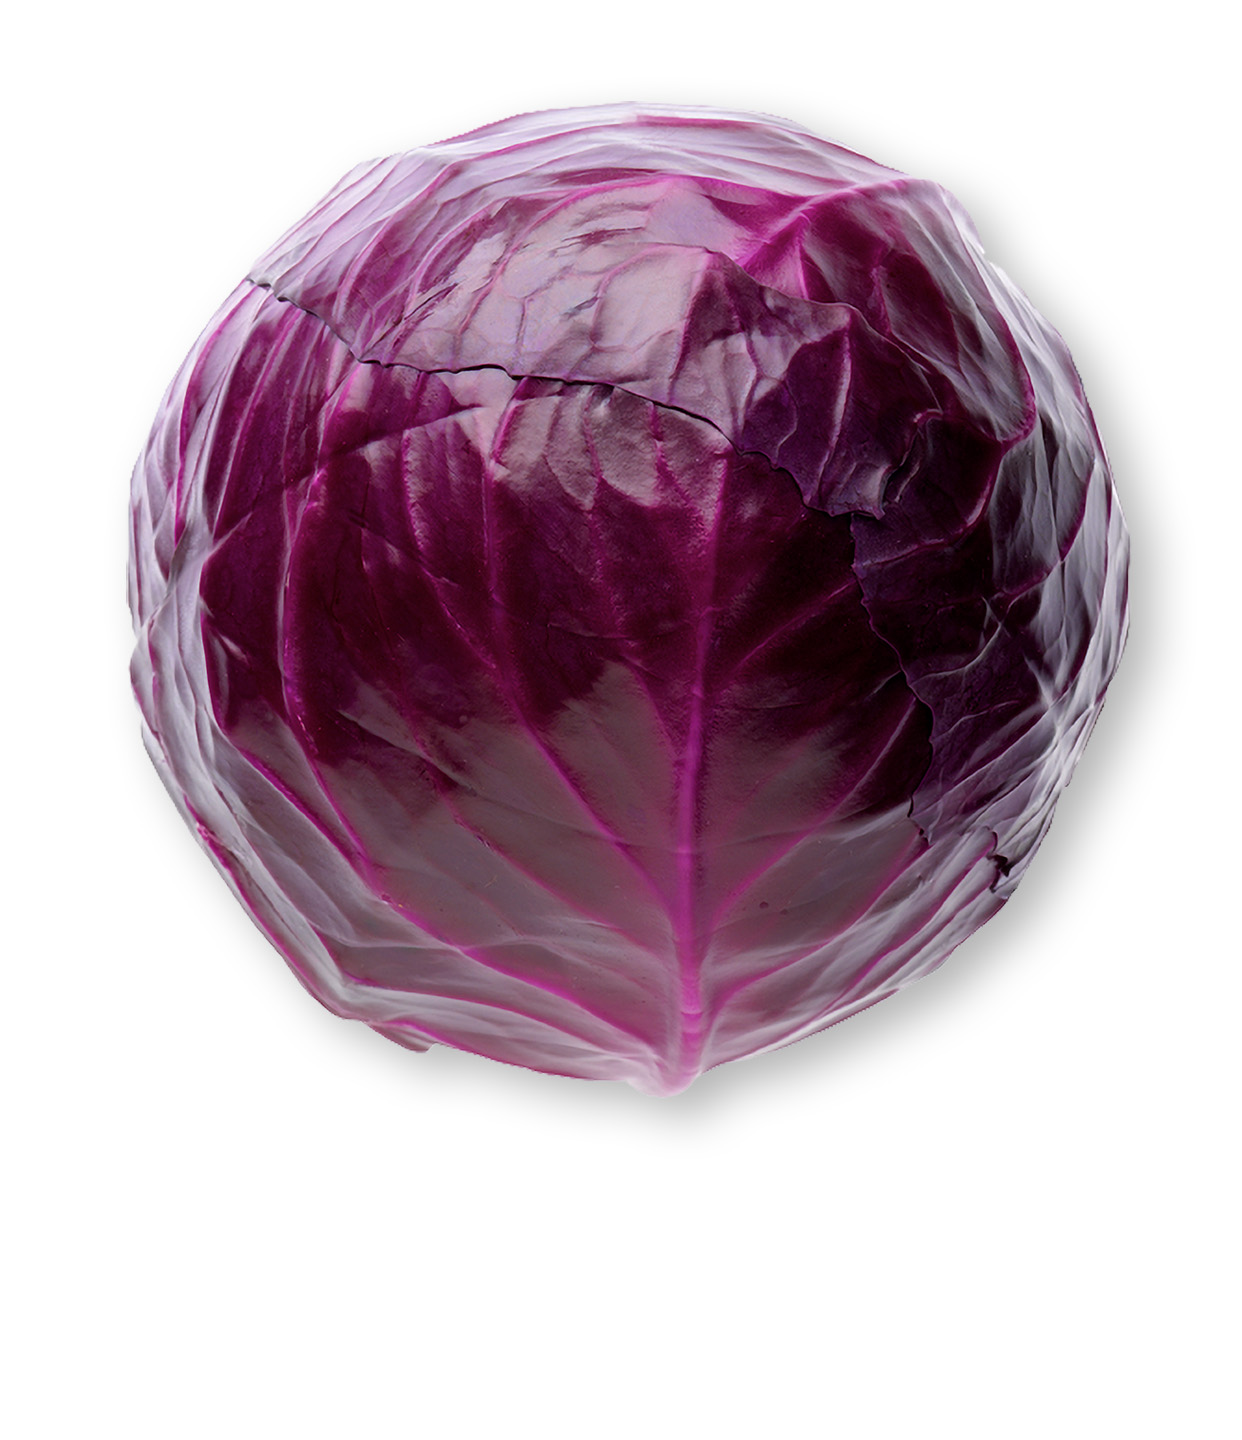 Head of Red Cabbage picture